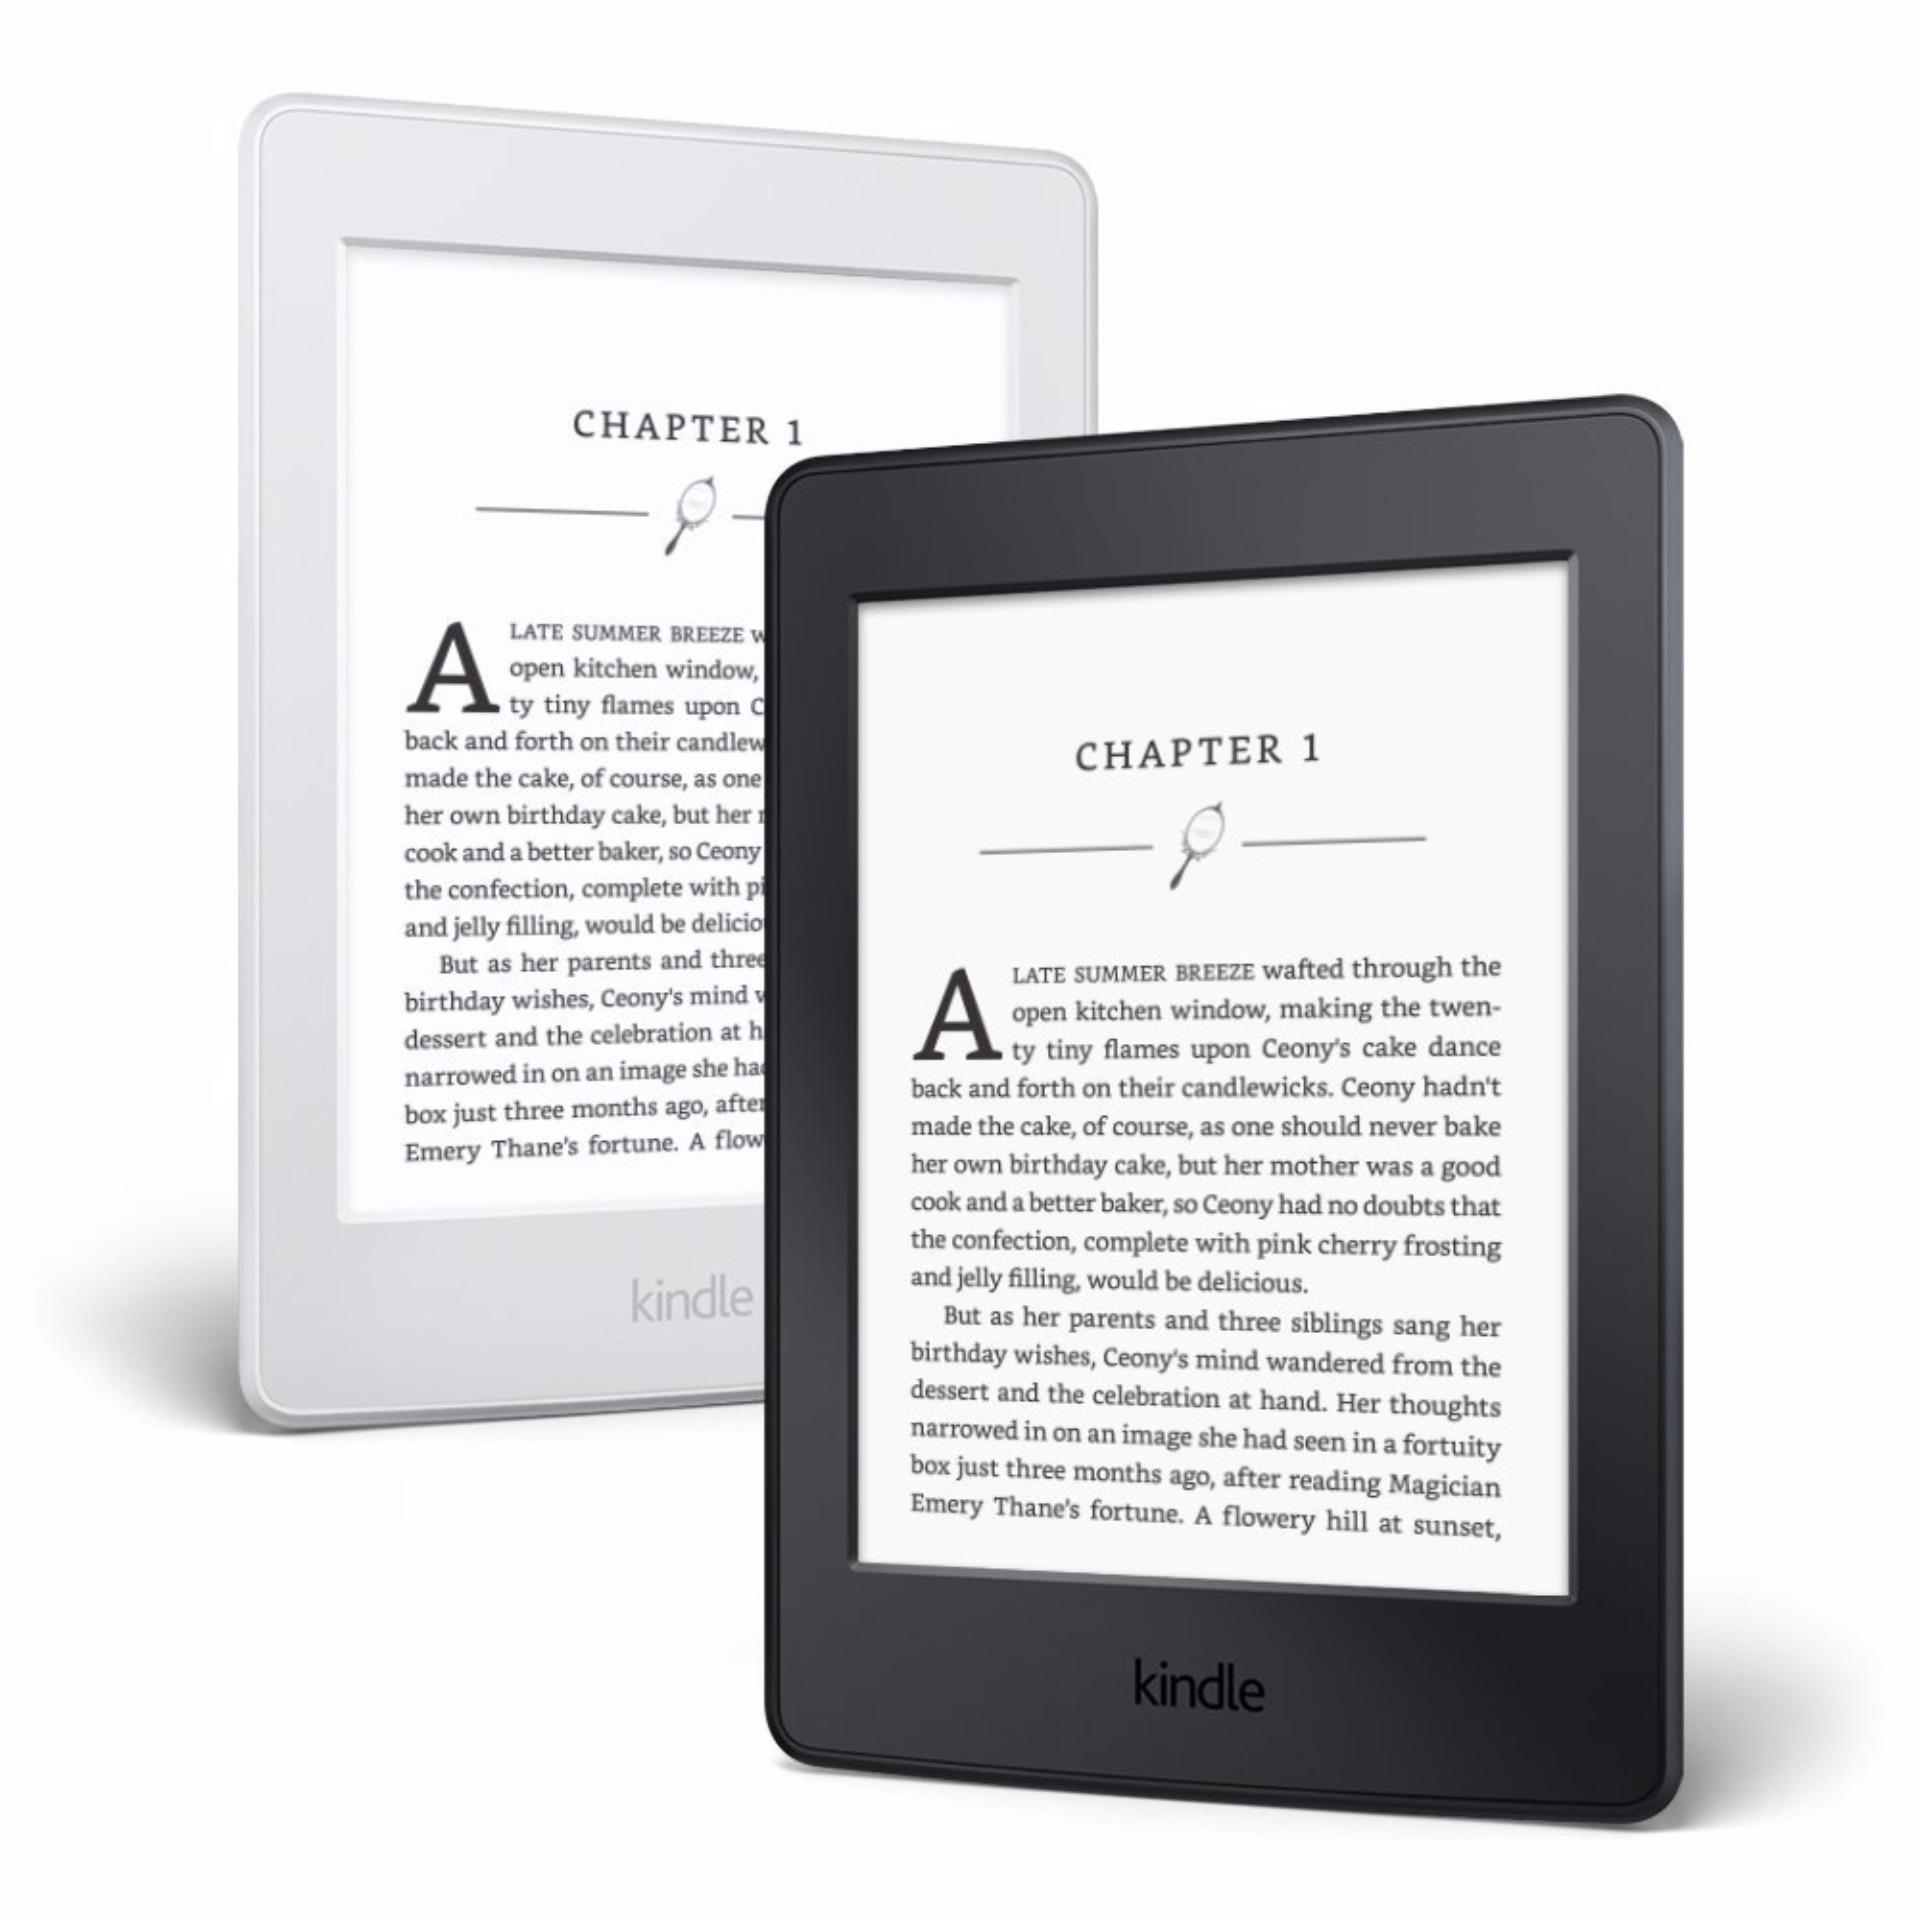 Certified Refurbished Kindle Paperwhite 3 - White 2016, 6